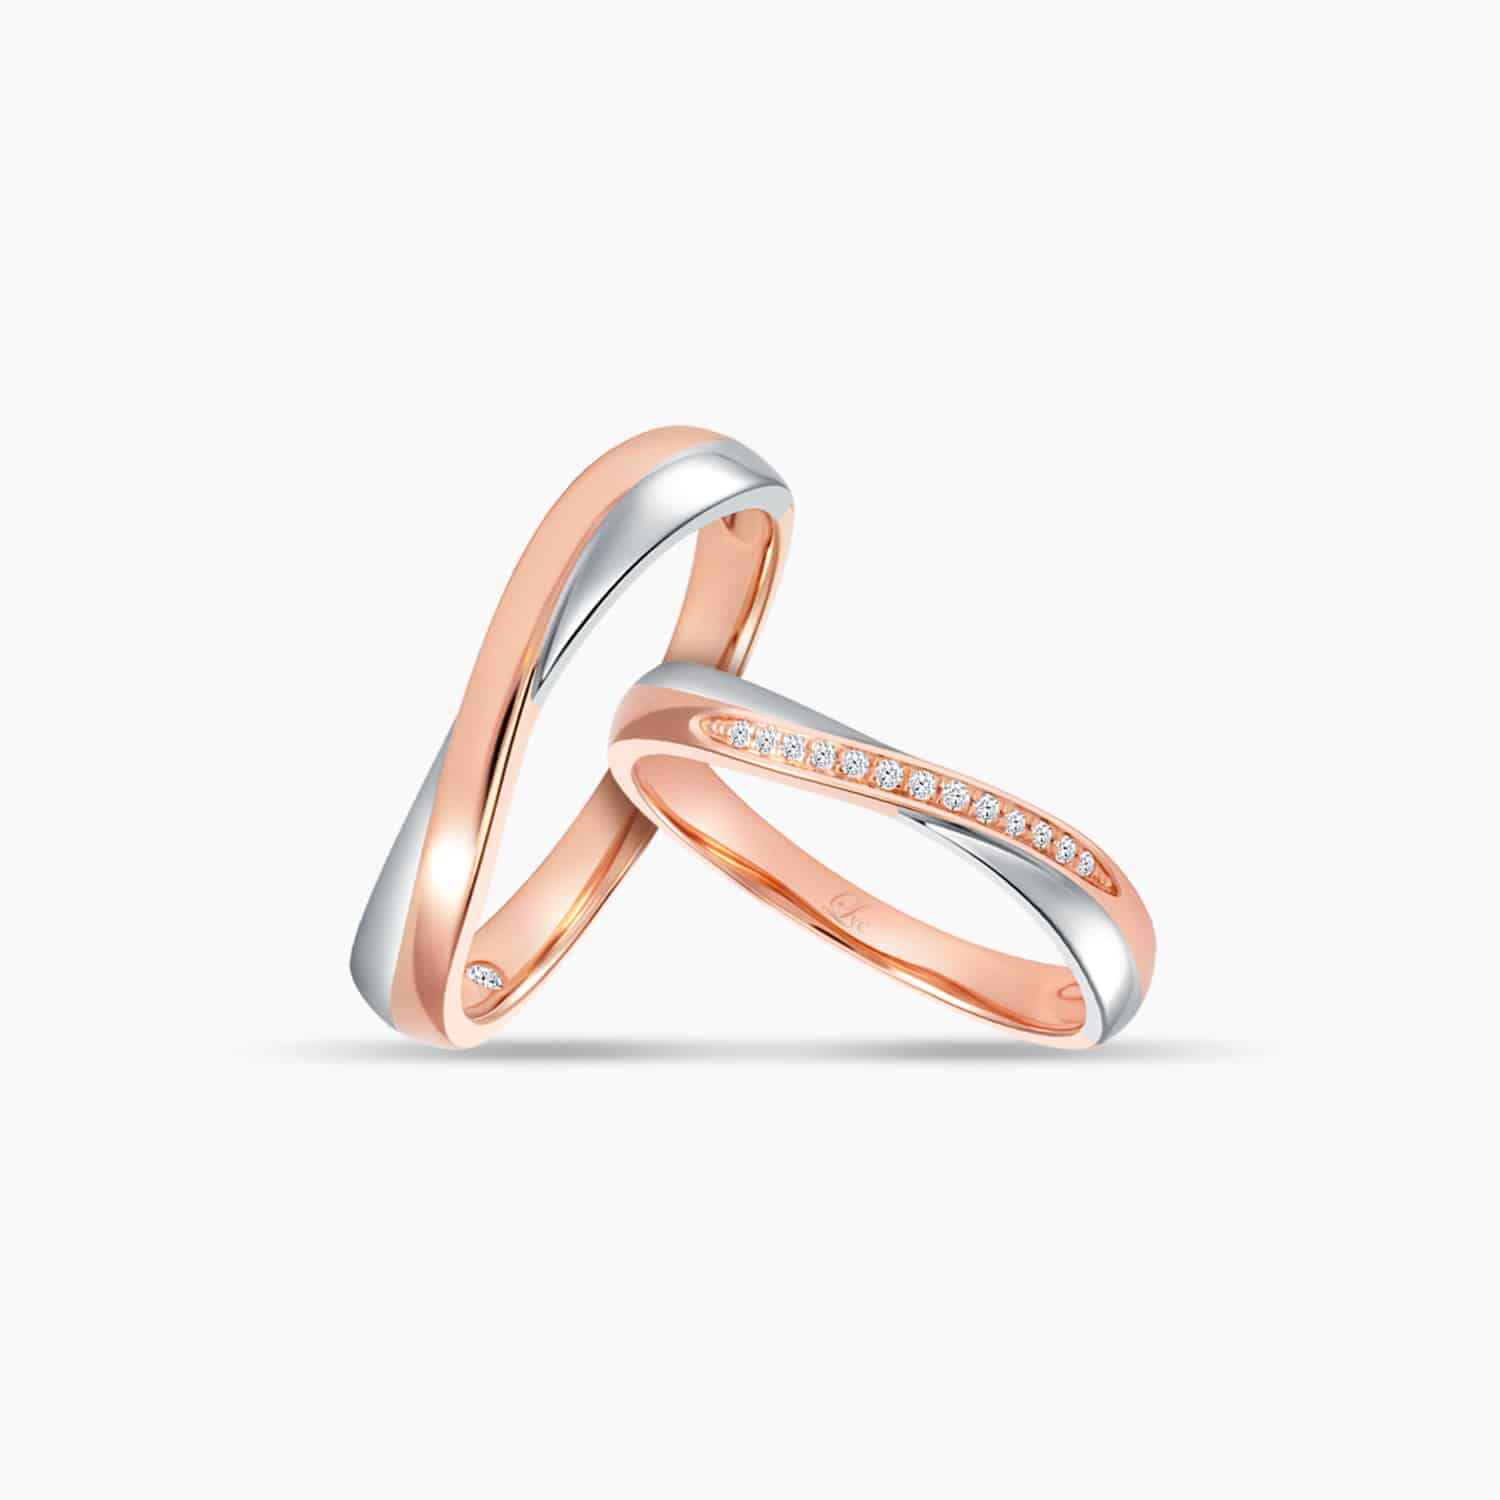 LVC PERFECTION BLISS WEDDING BAND IN WHITE AND ROSE GOLD a set of wedding bands in white and rose gold with diamonds 钻石 戒指 cincin diamond